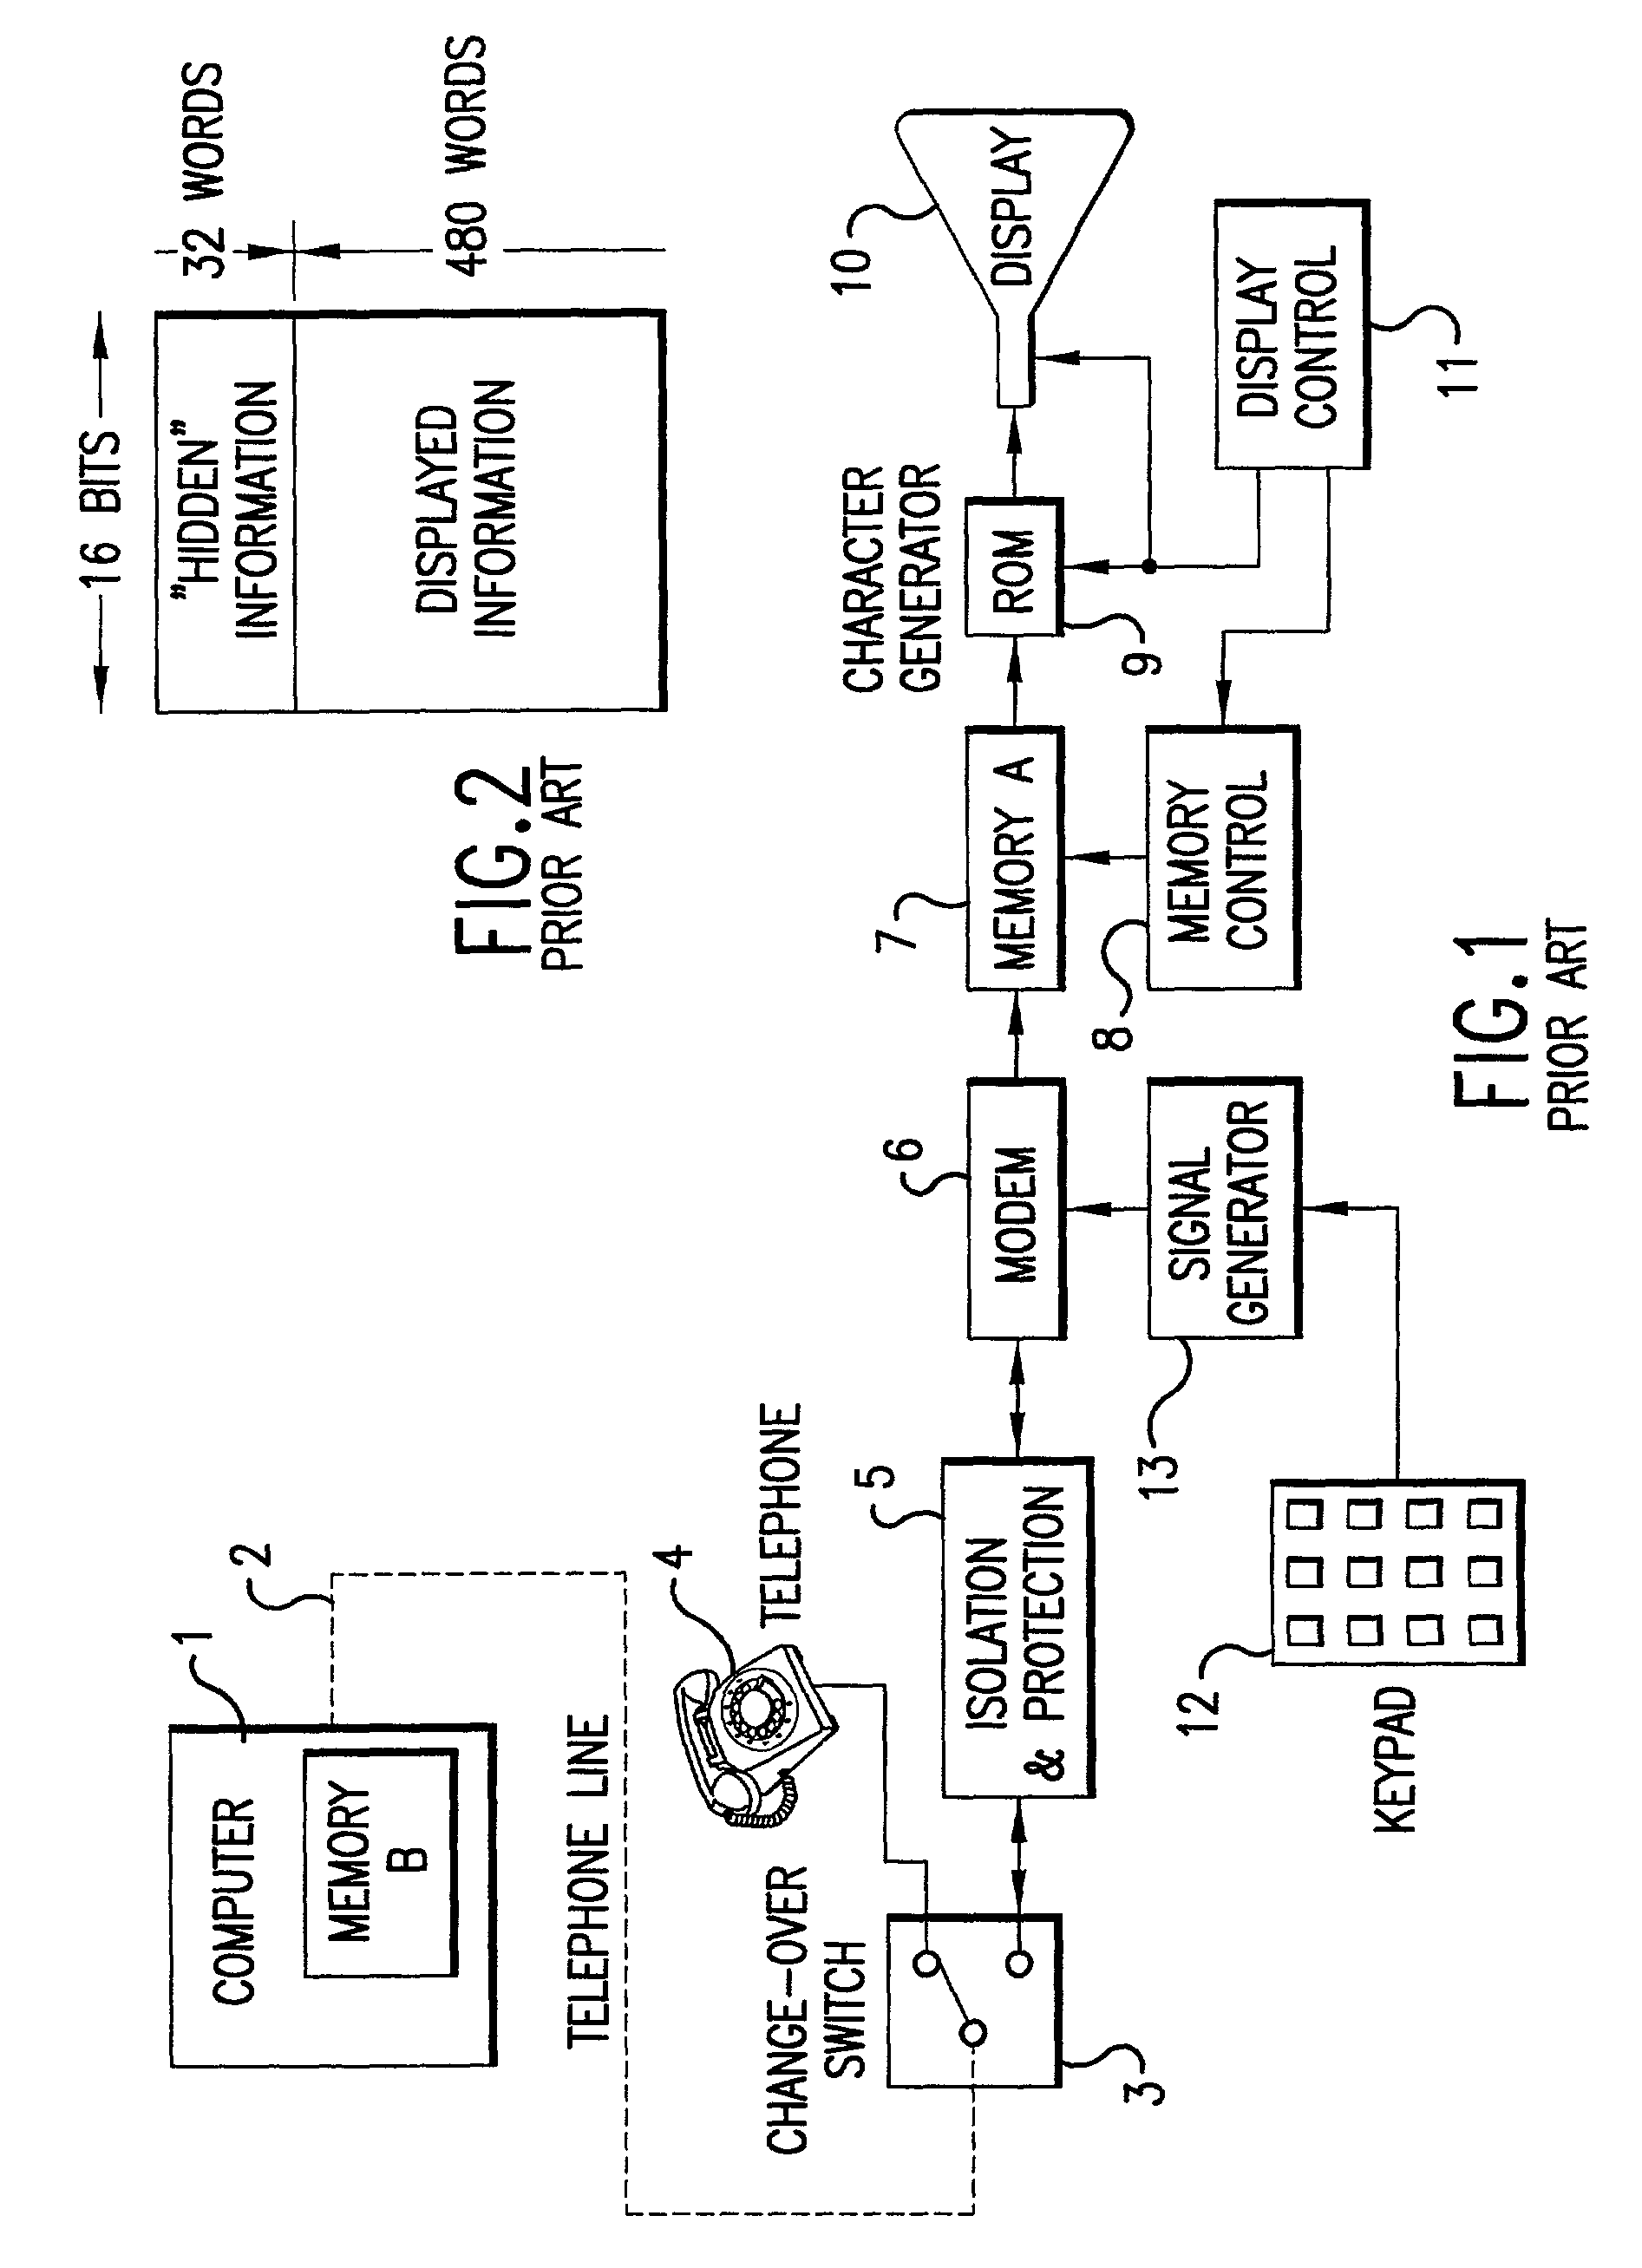 Distributed link processing system for delivering application and multi-media content on the internet